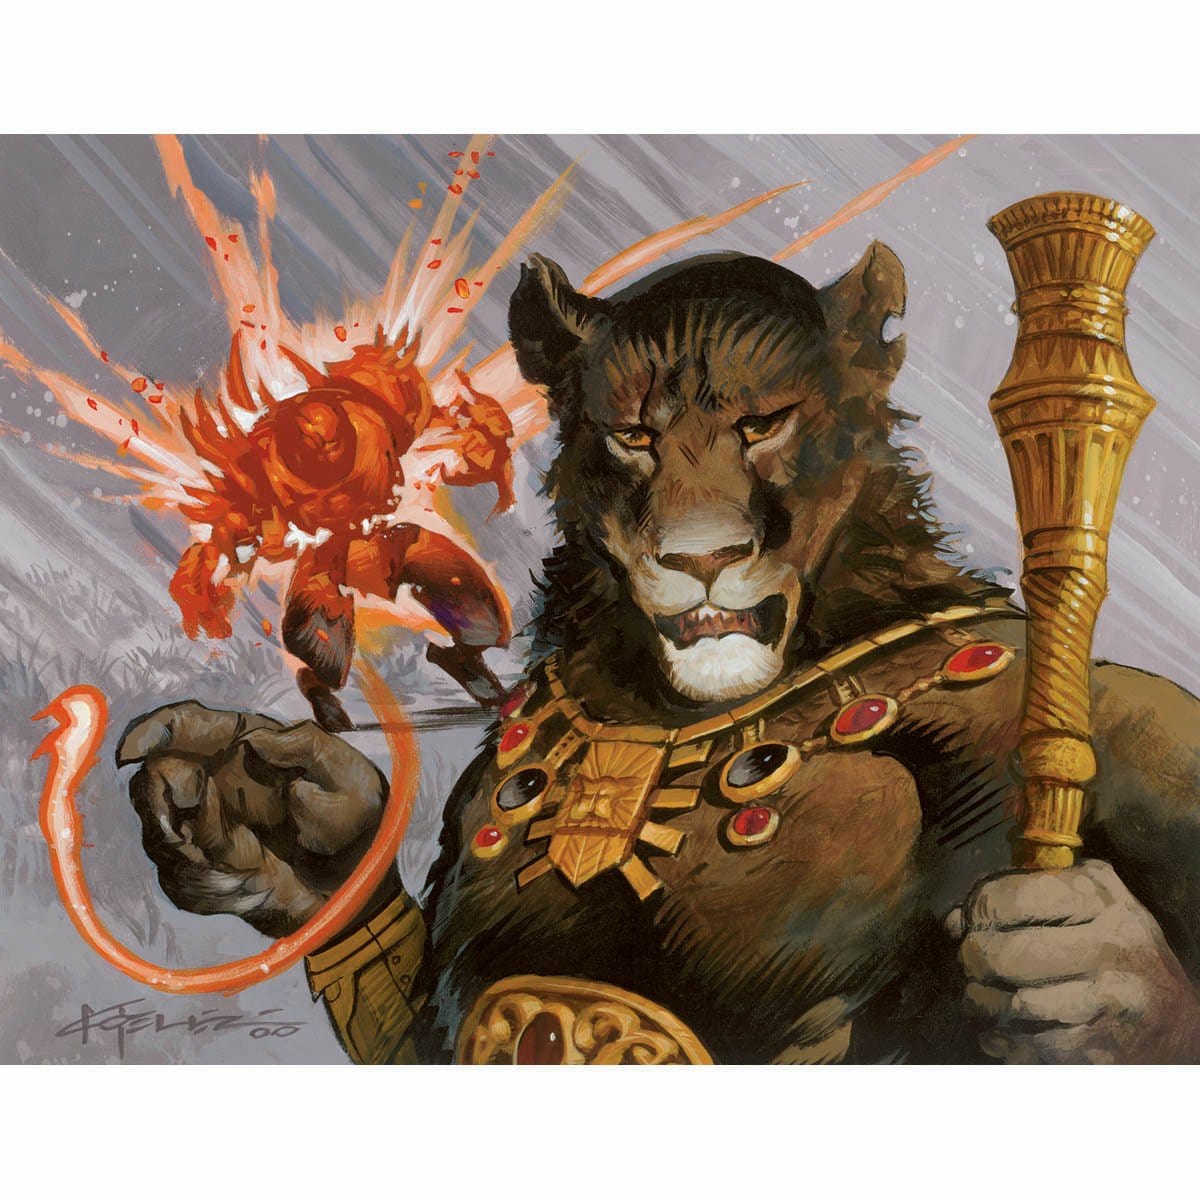 Planeswalker's Fury Print - Print - Original Magic Art - Accessories for Magic the Gathering and other card games